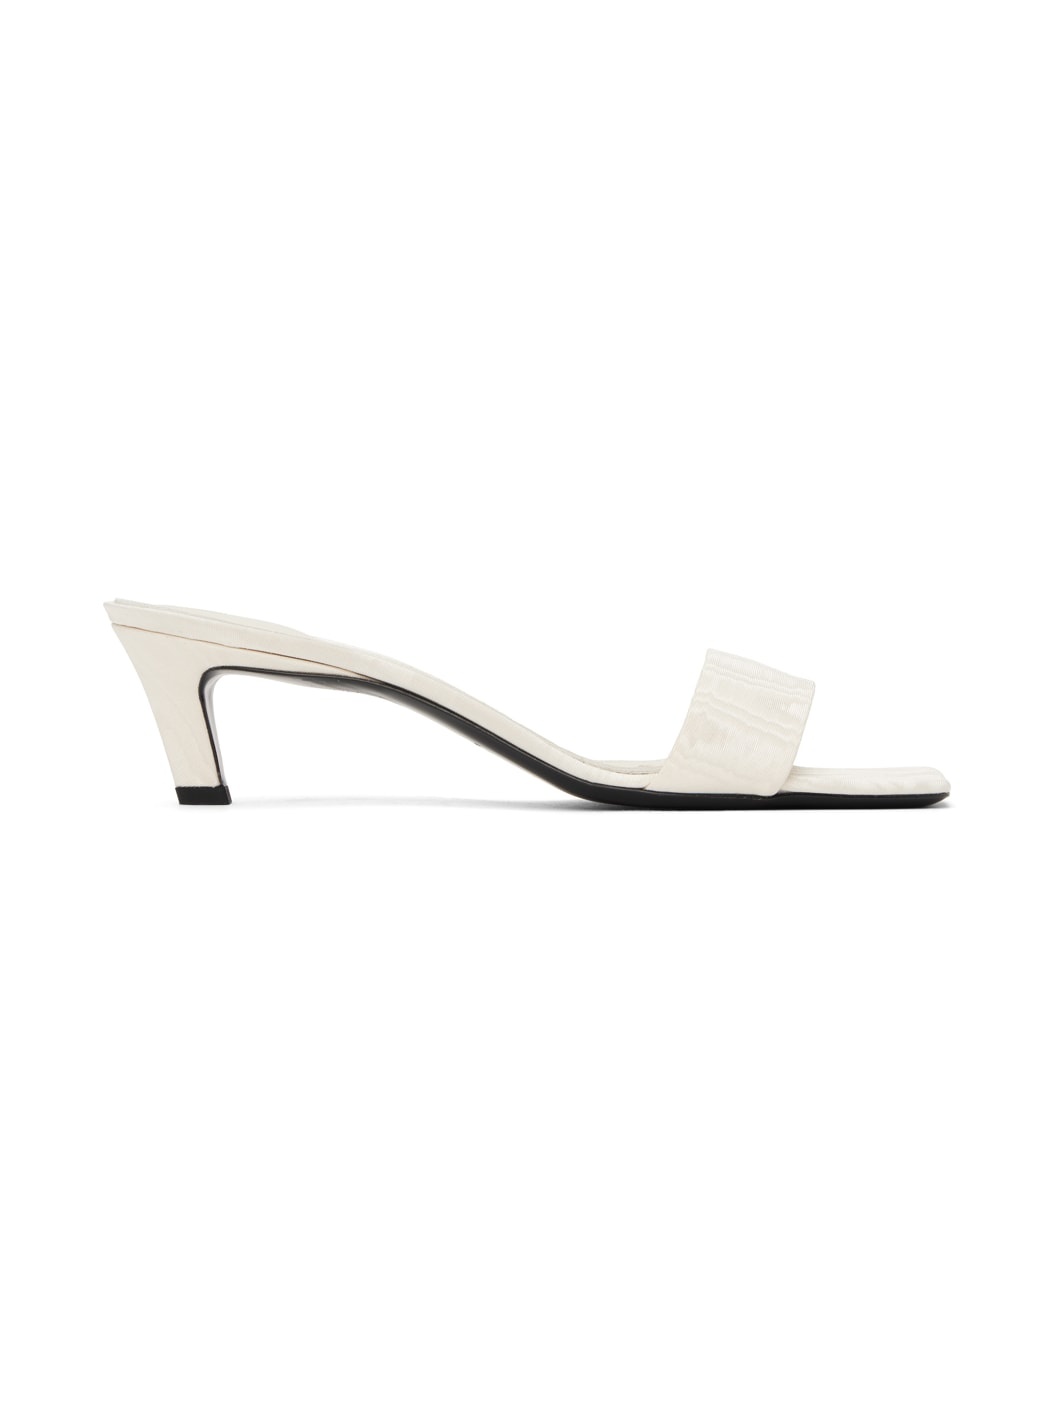 Off-White 'The Mule' Heeled Sandals - 1